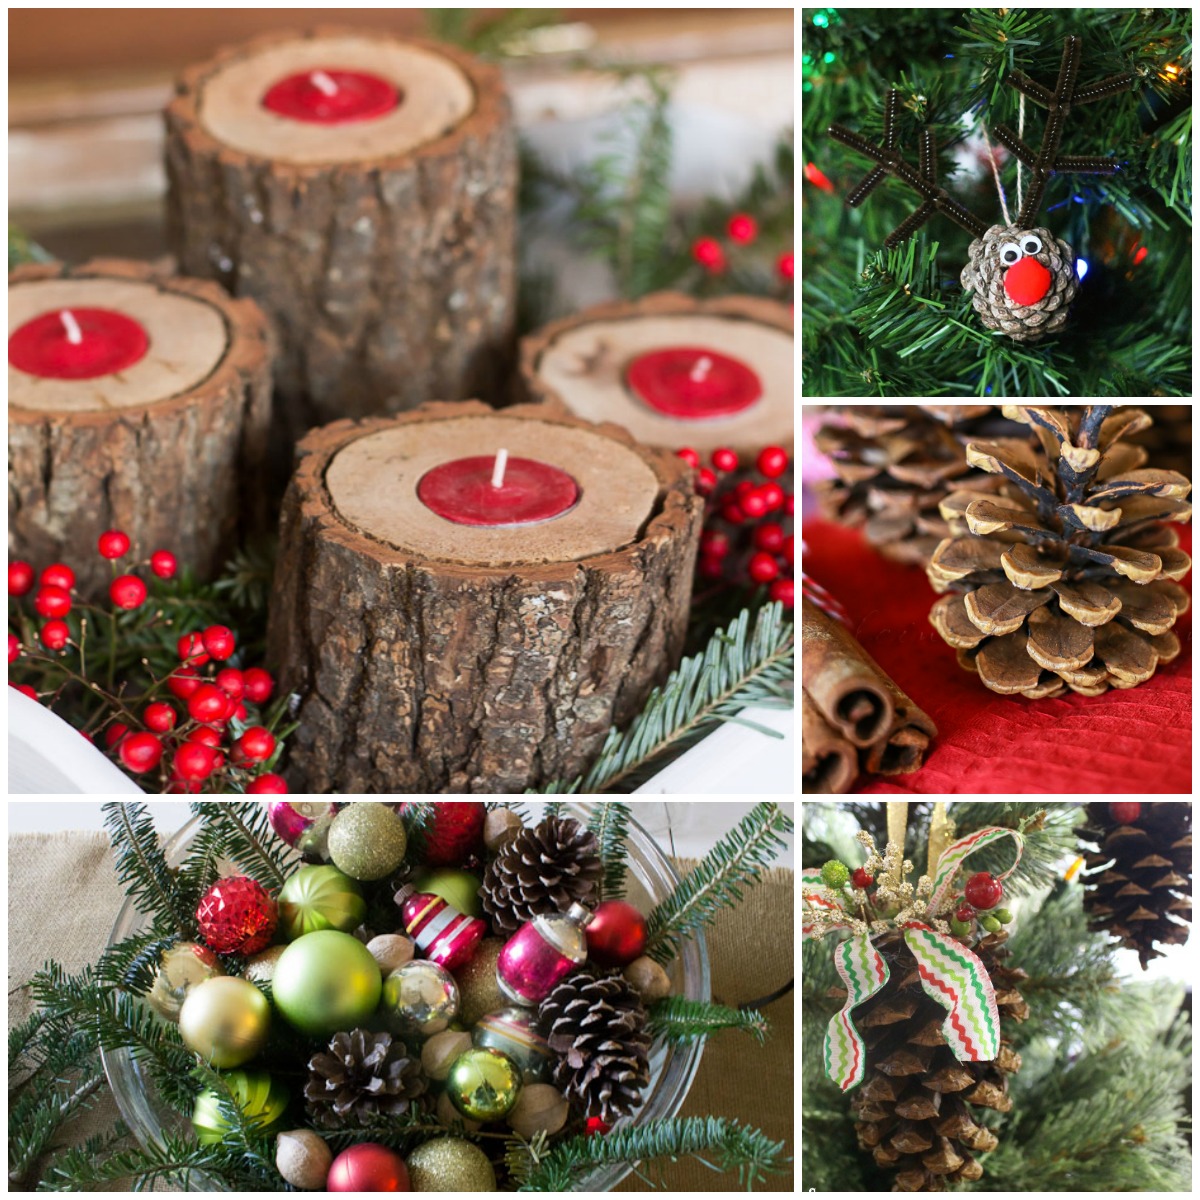 Adults Christmas crafting evening – Make your own natural table decorations